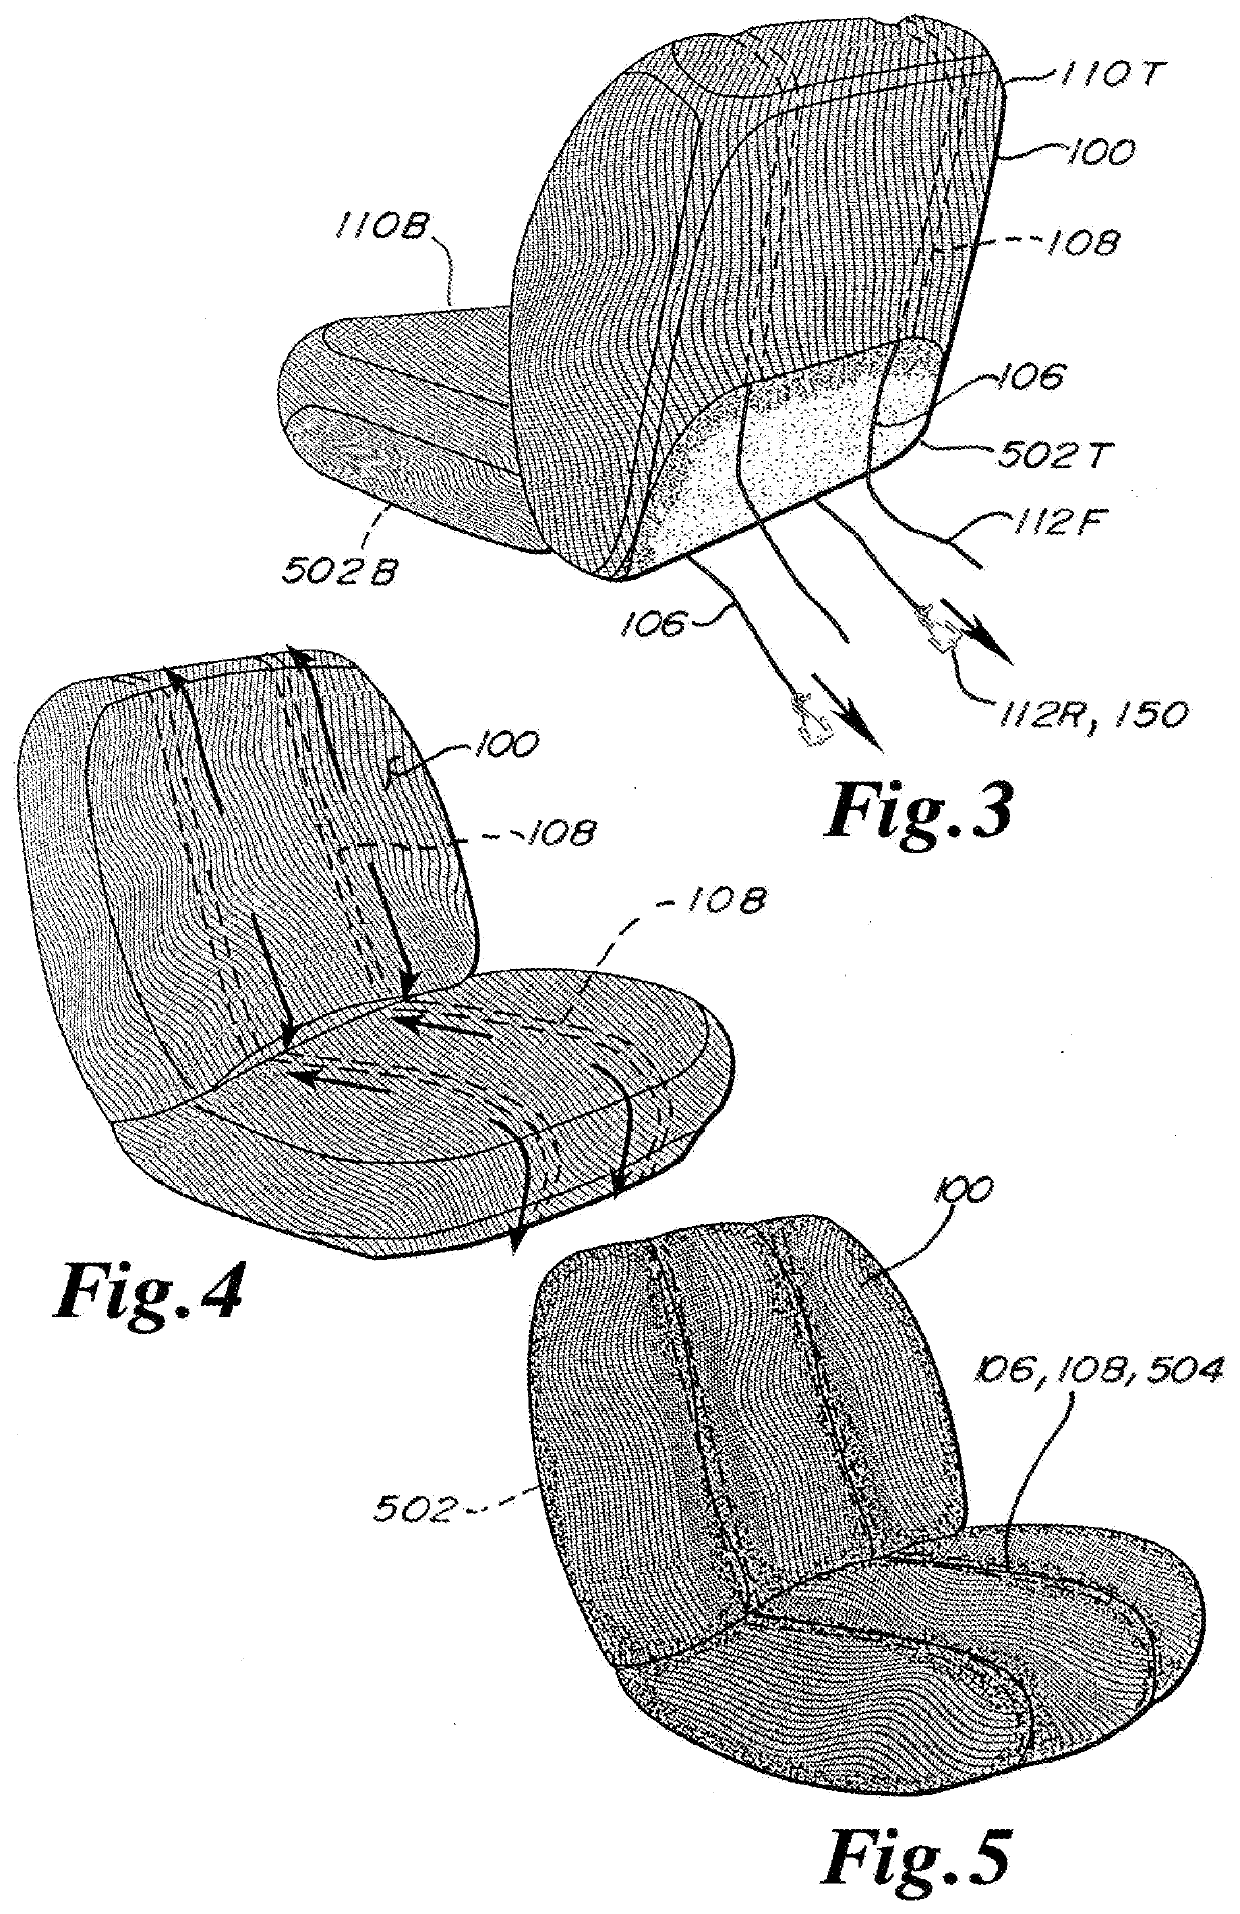 Seat cover for linearly-tufted automobile seats